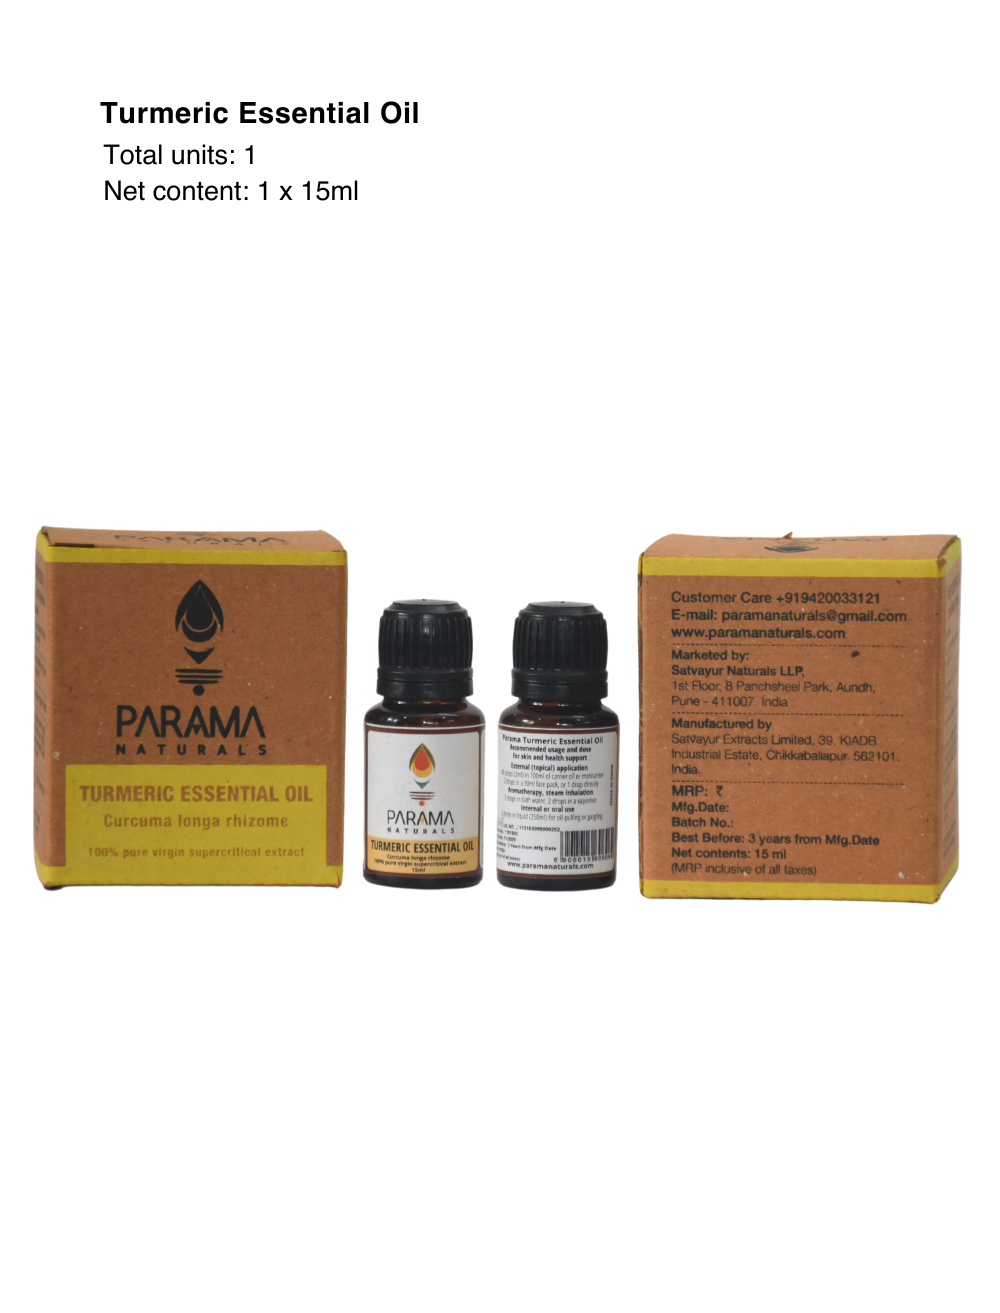 Turmeric Essential Oil For Aging & Itchy Skin, Acne & Scars, Aromatherapy, 15ml